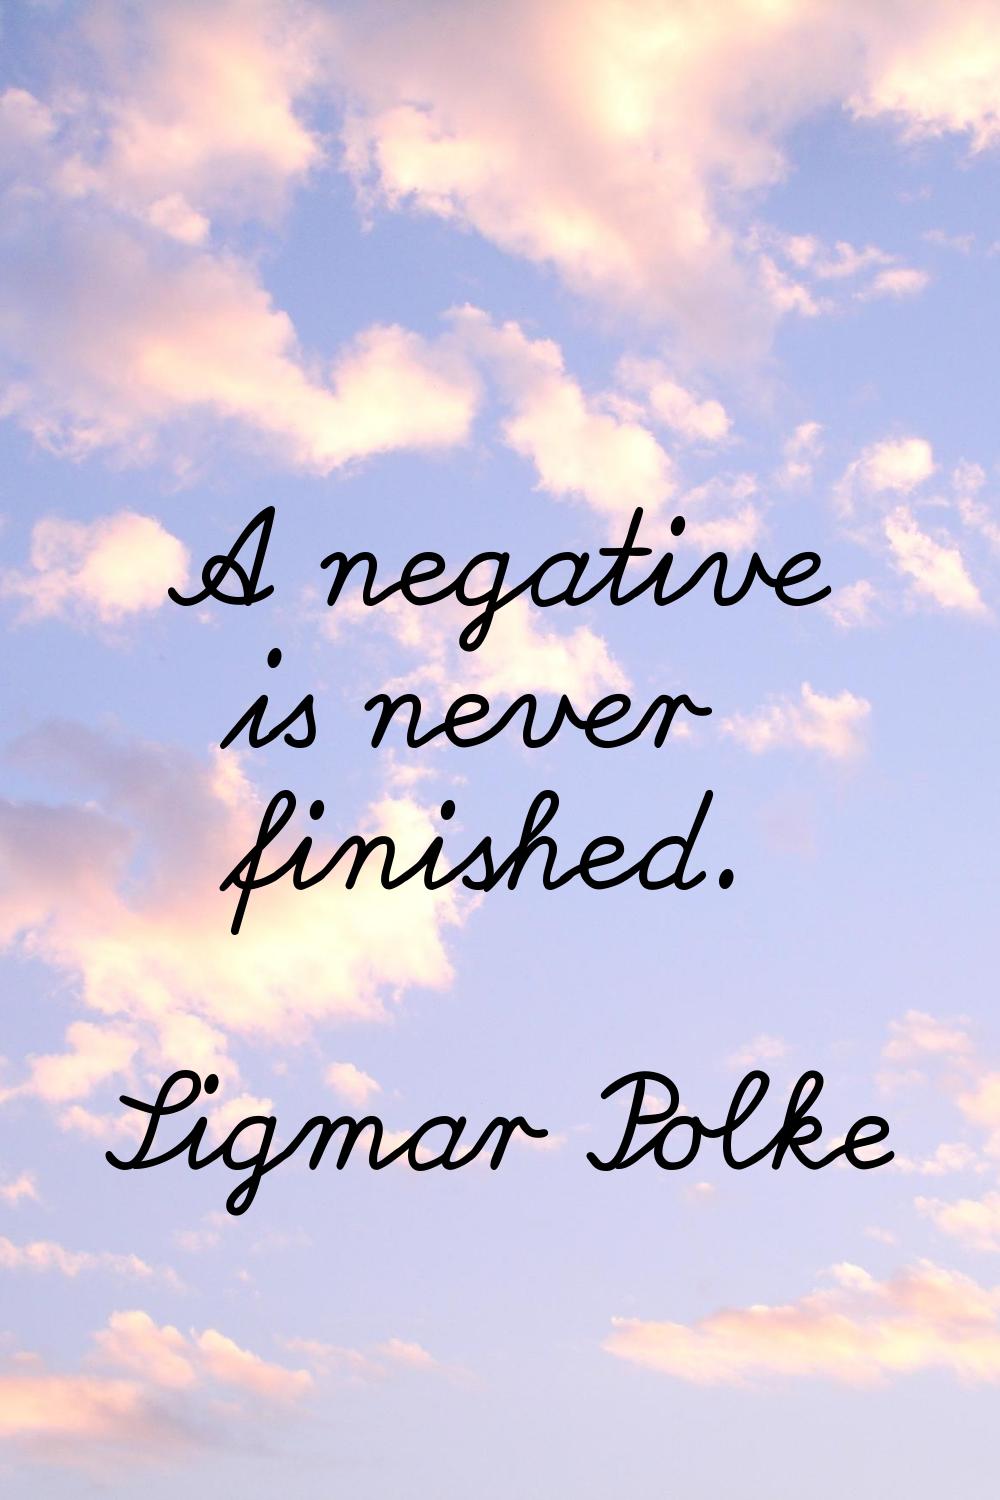 A negative is never finished.